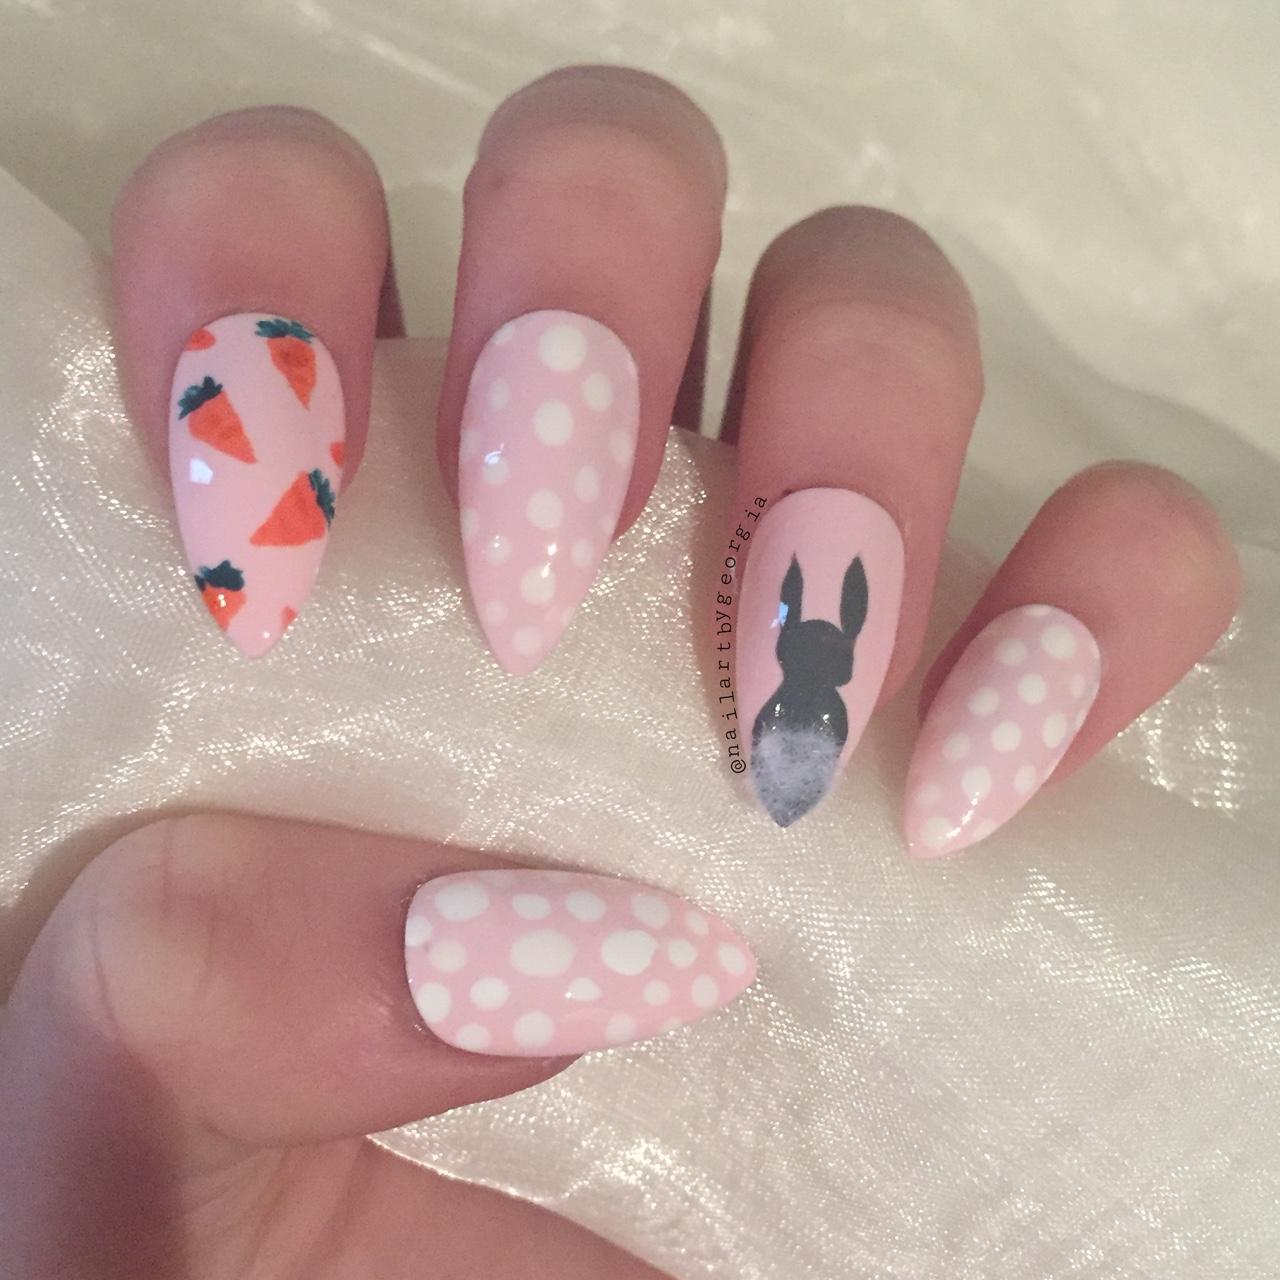 False Nails Press on Reusable Adhesive Fake Nail with Design Gradient Pink  White Flower Aesthetic Artificial